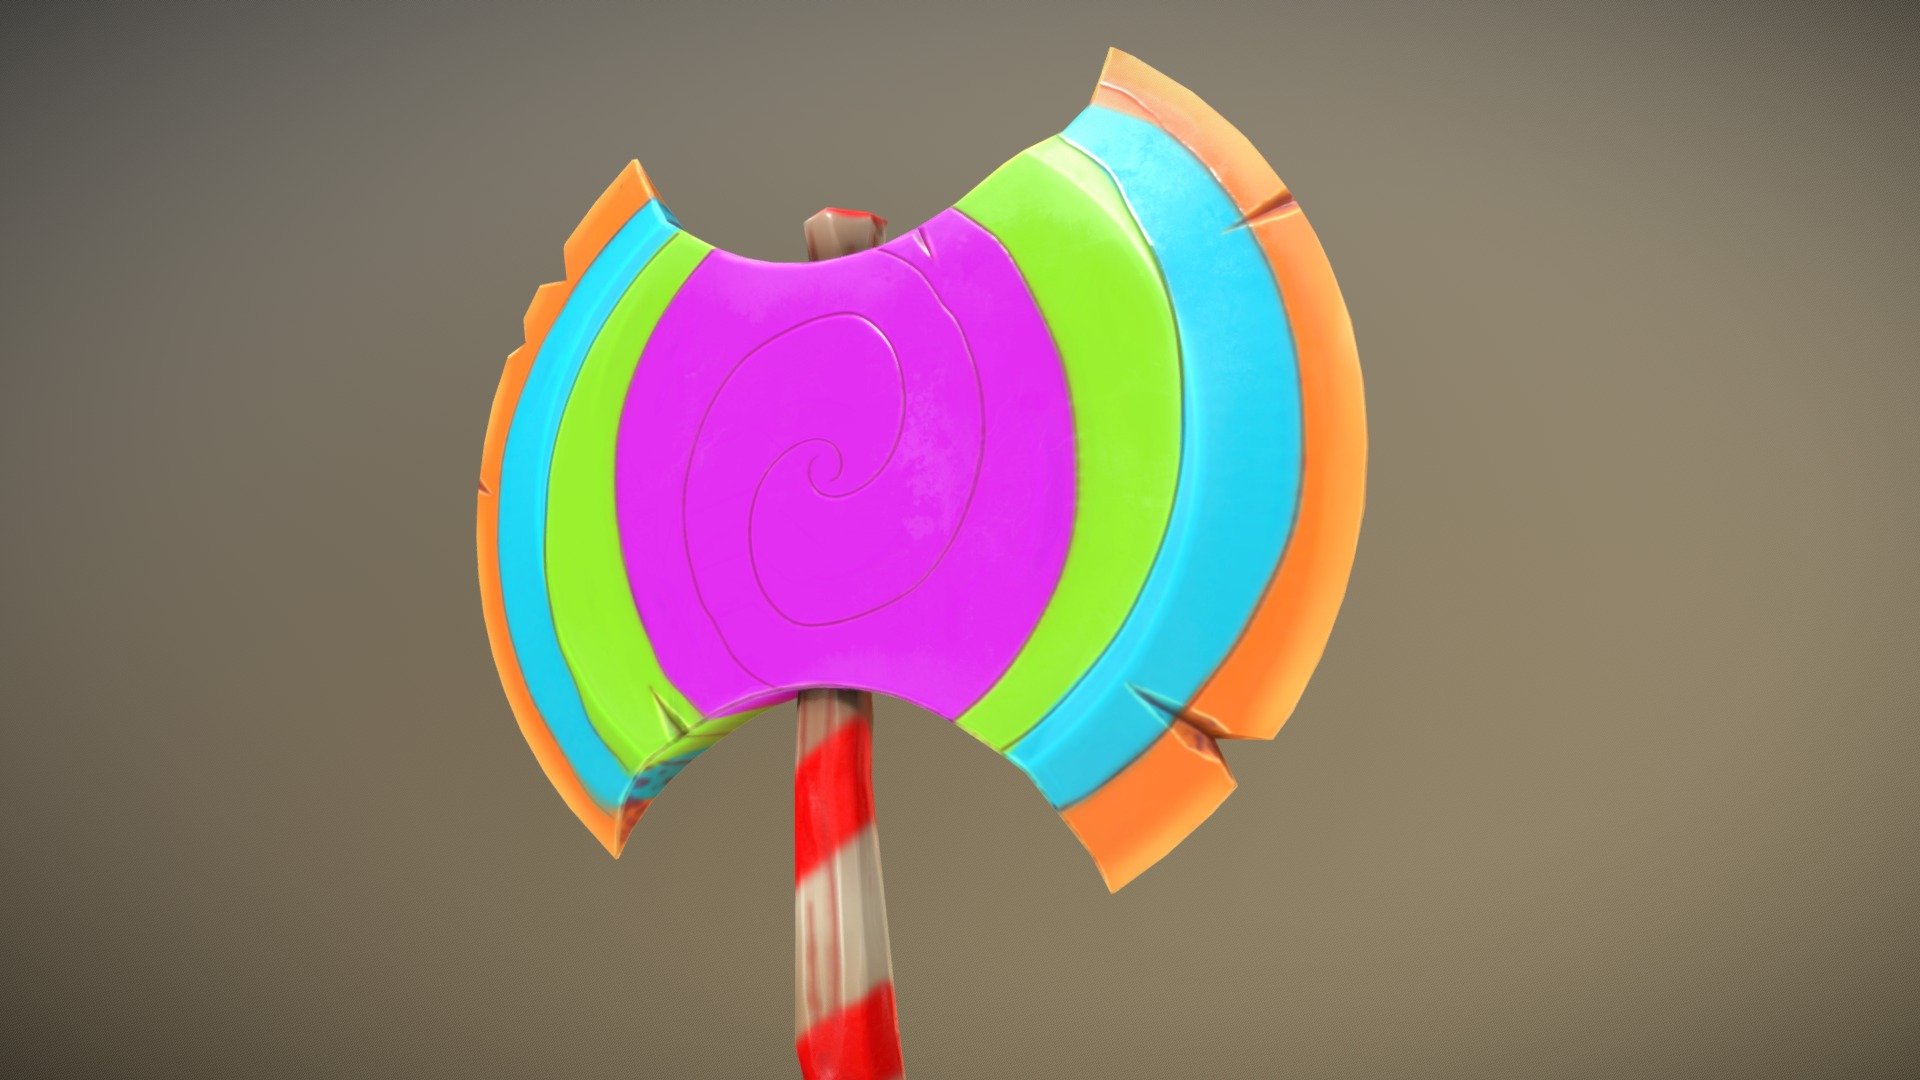 Everyone loves candy and stylized weapons! - Candy Axe - 3D model by crazy_pixel 3d model